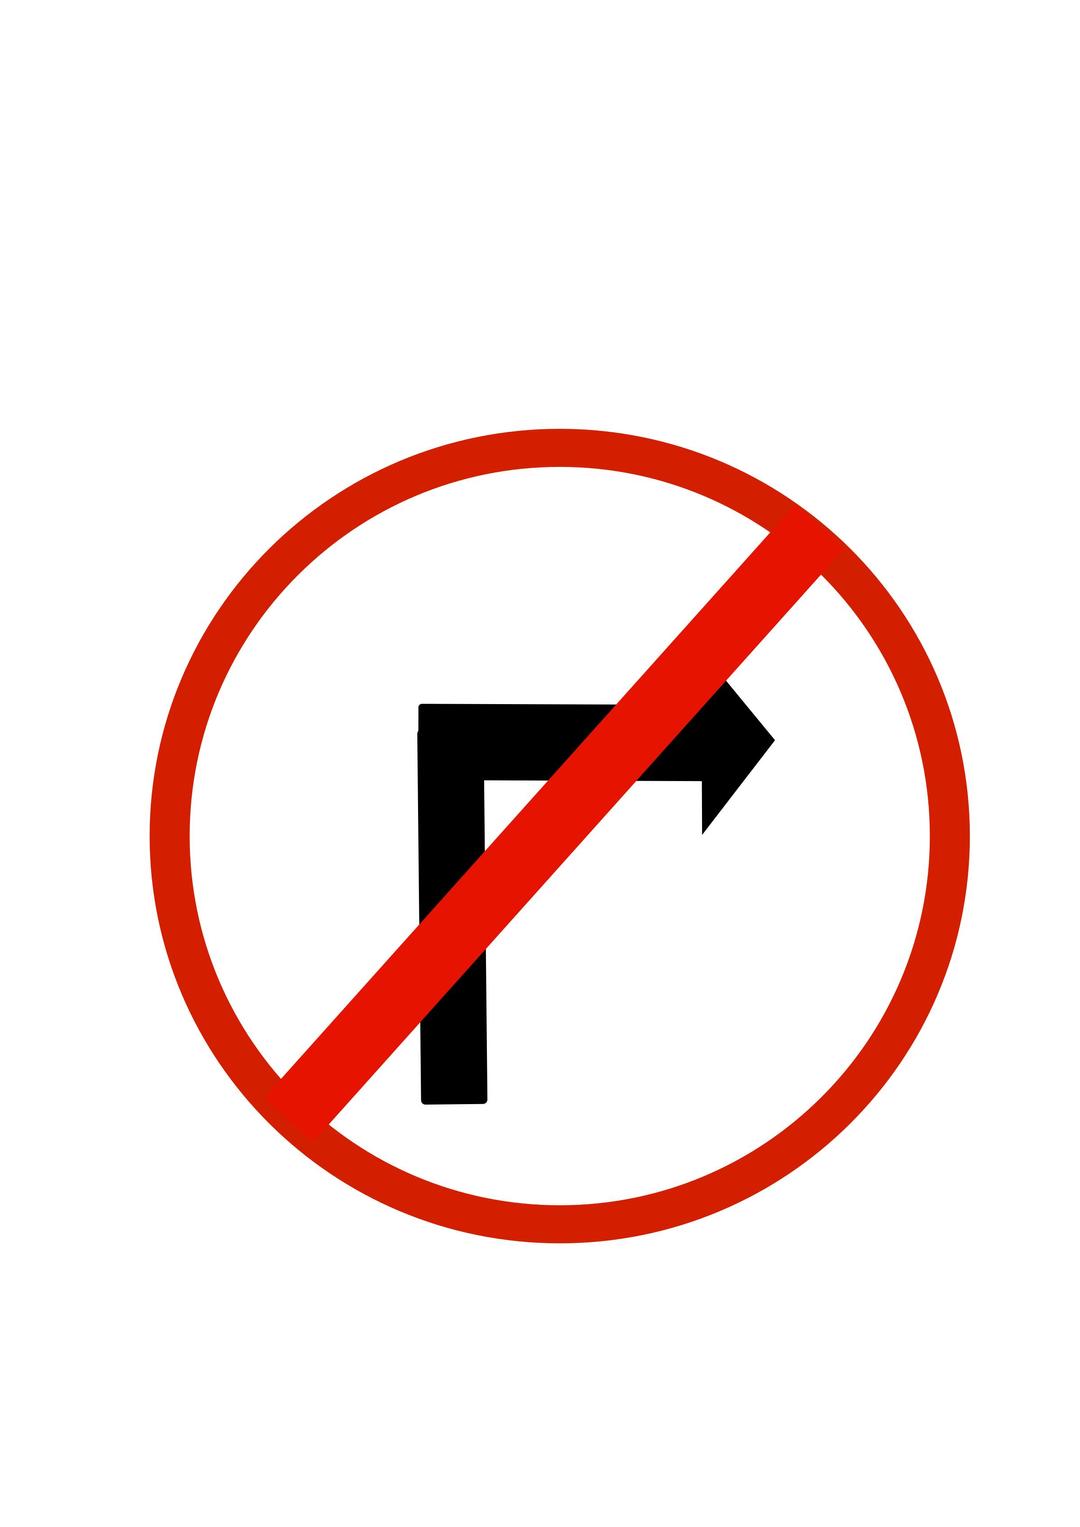 Indian road sign - Right turn prohibited png transparent